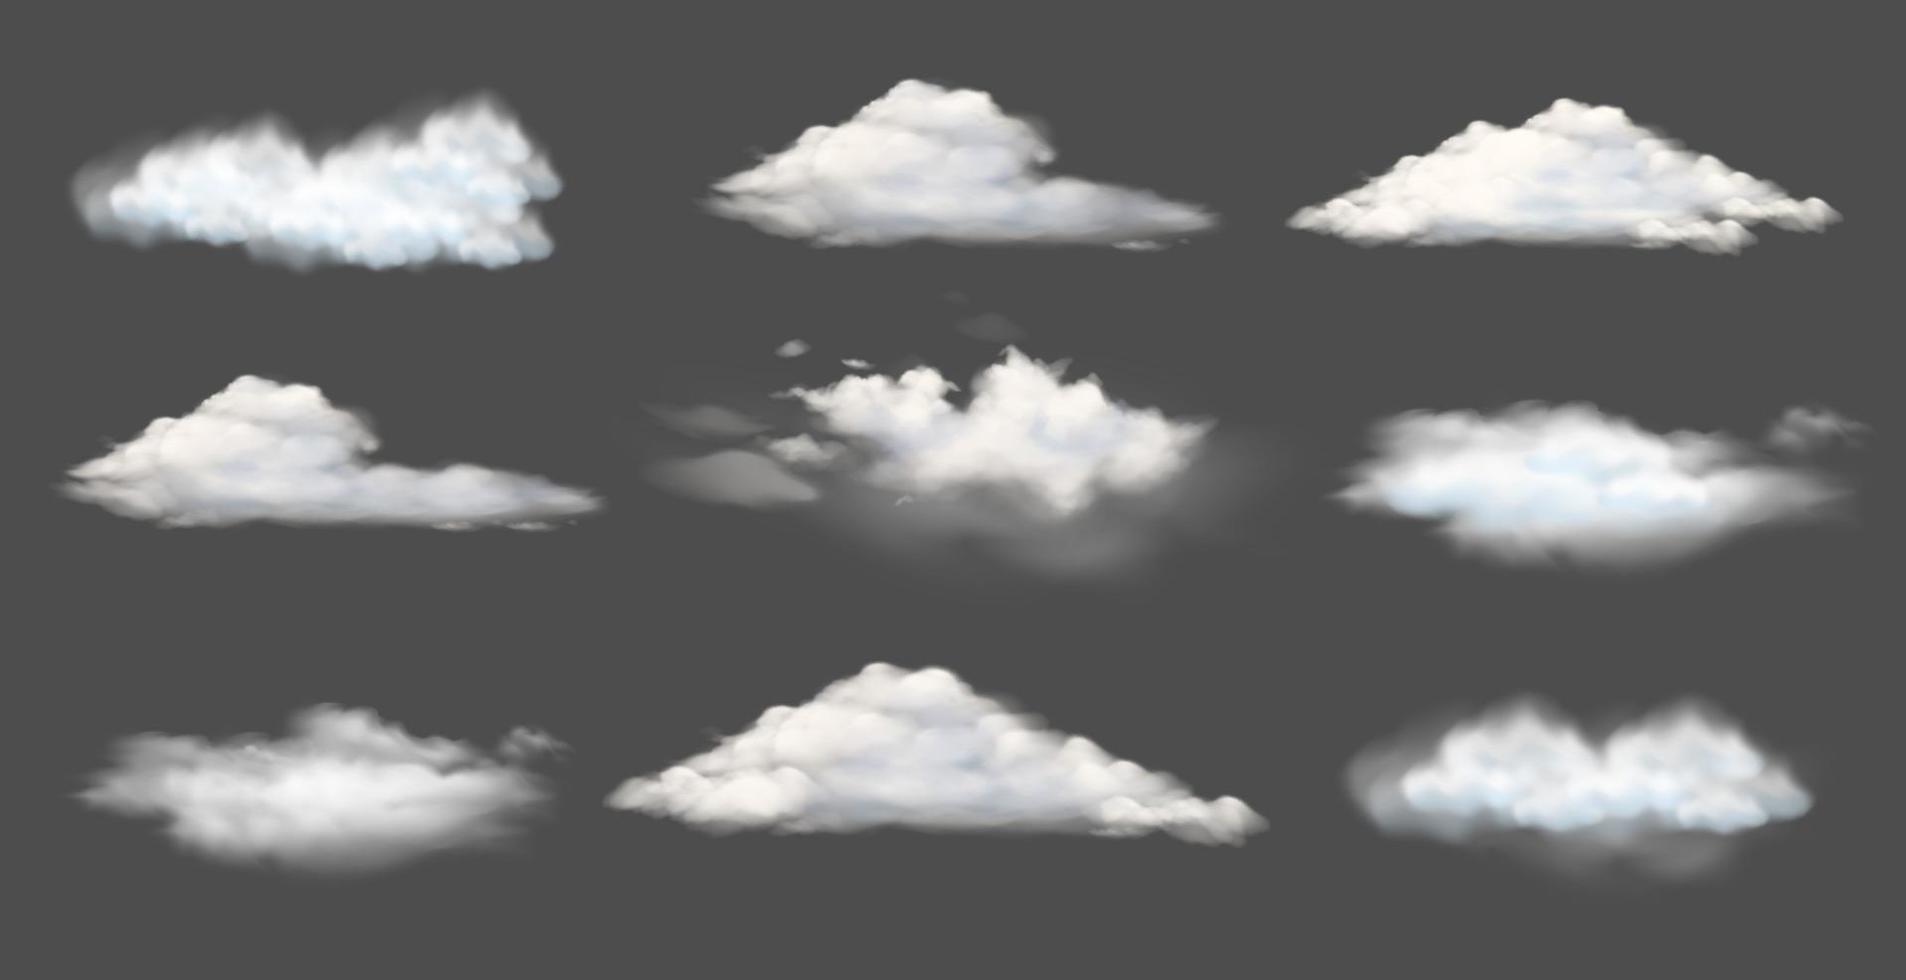 collection of white clouds or fog of various shapes, vector illustration of natural scenery design elements